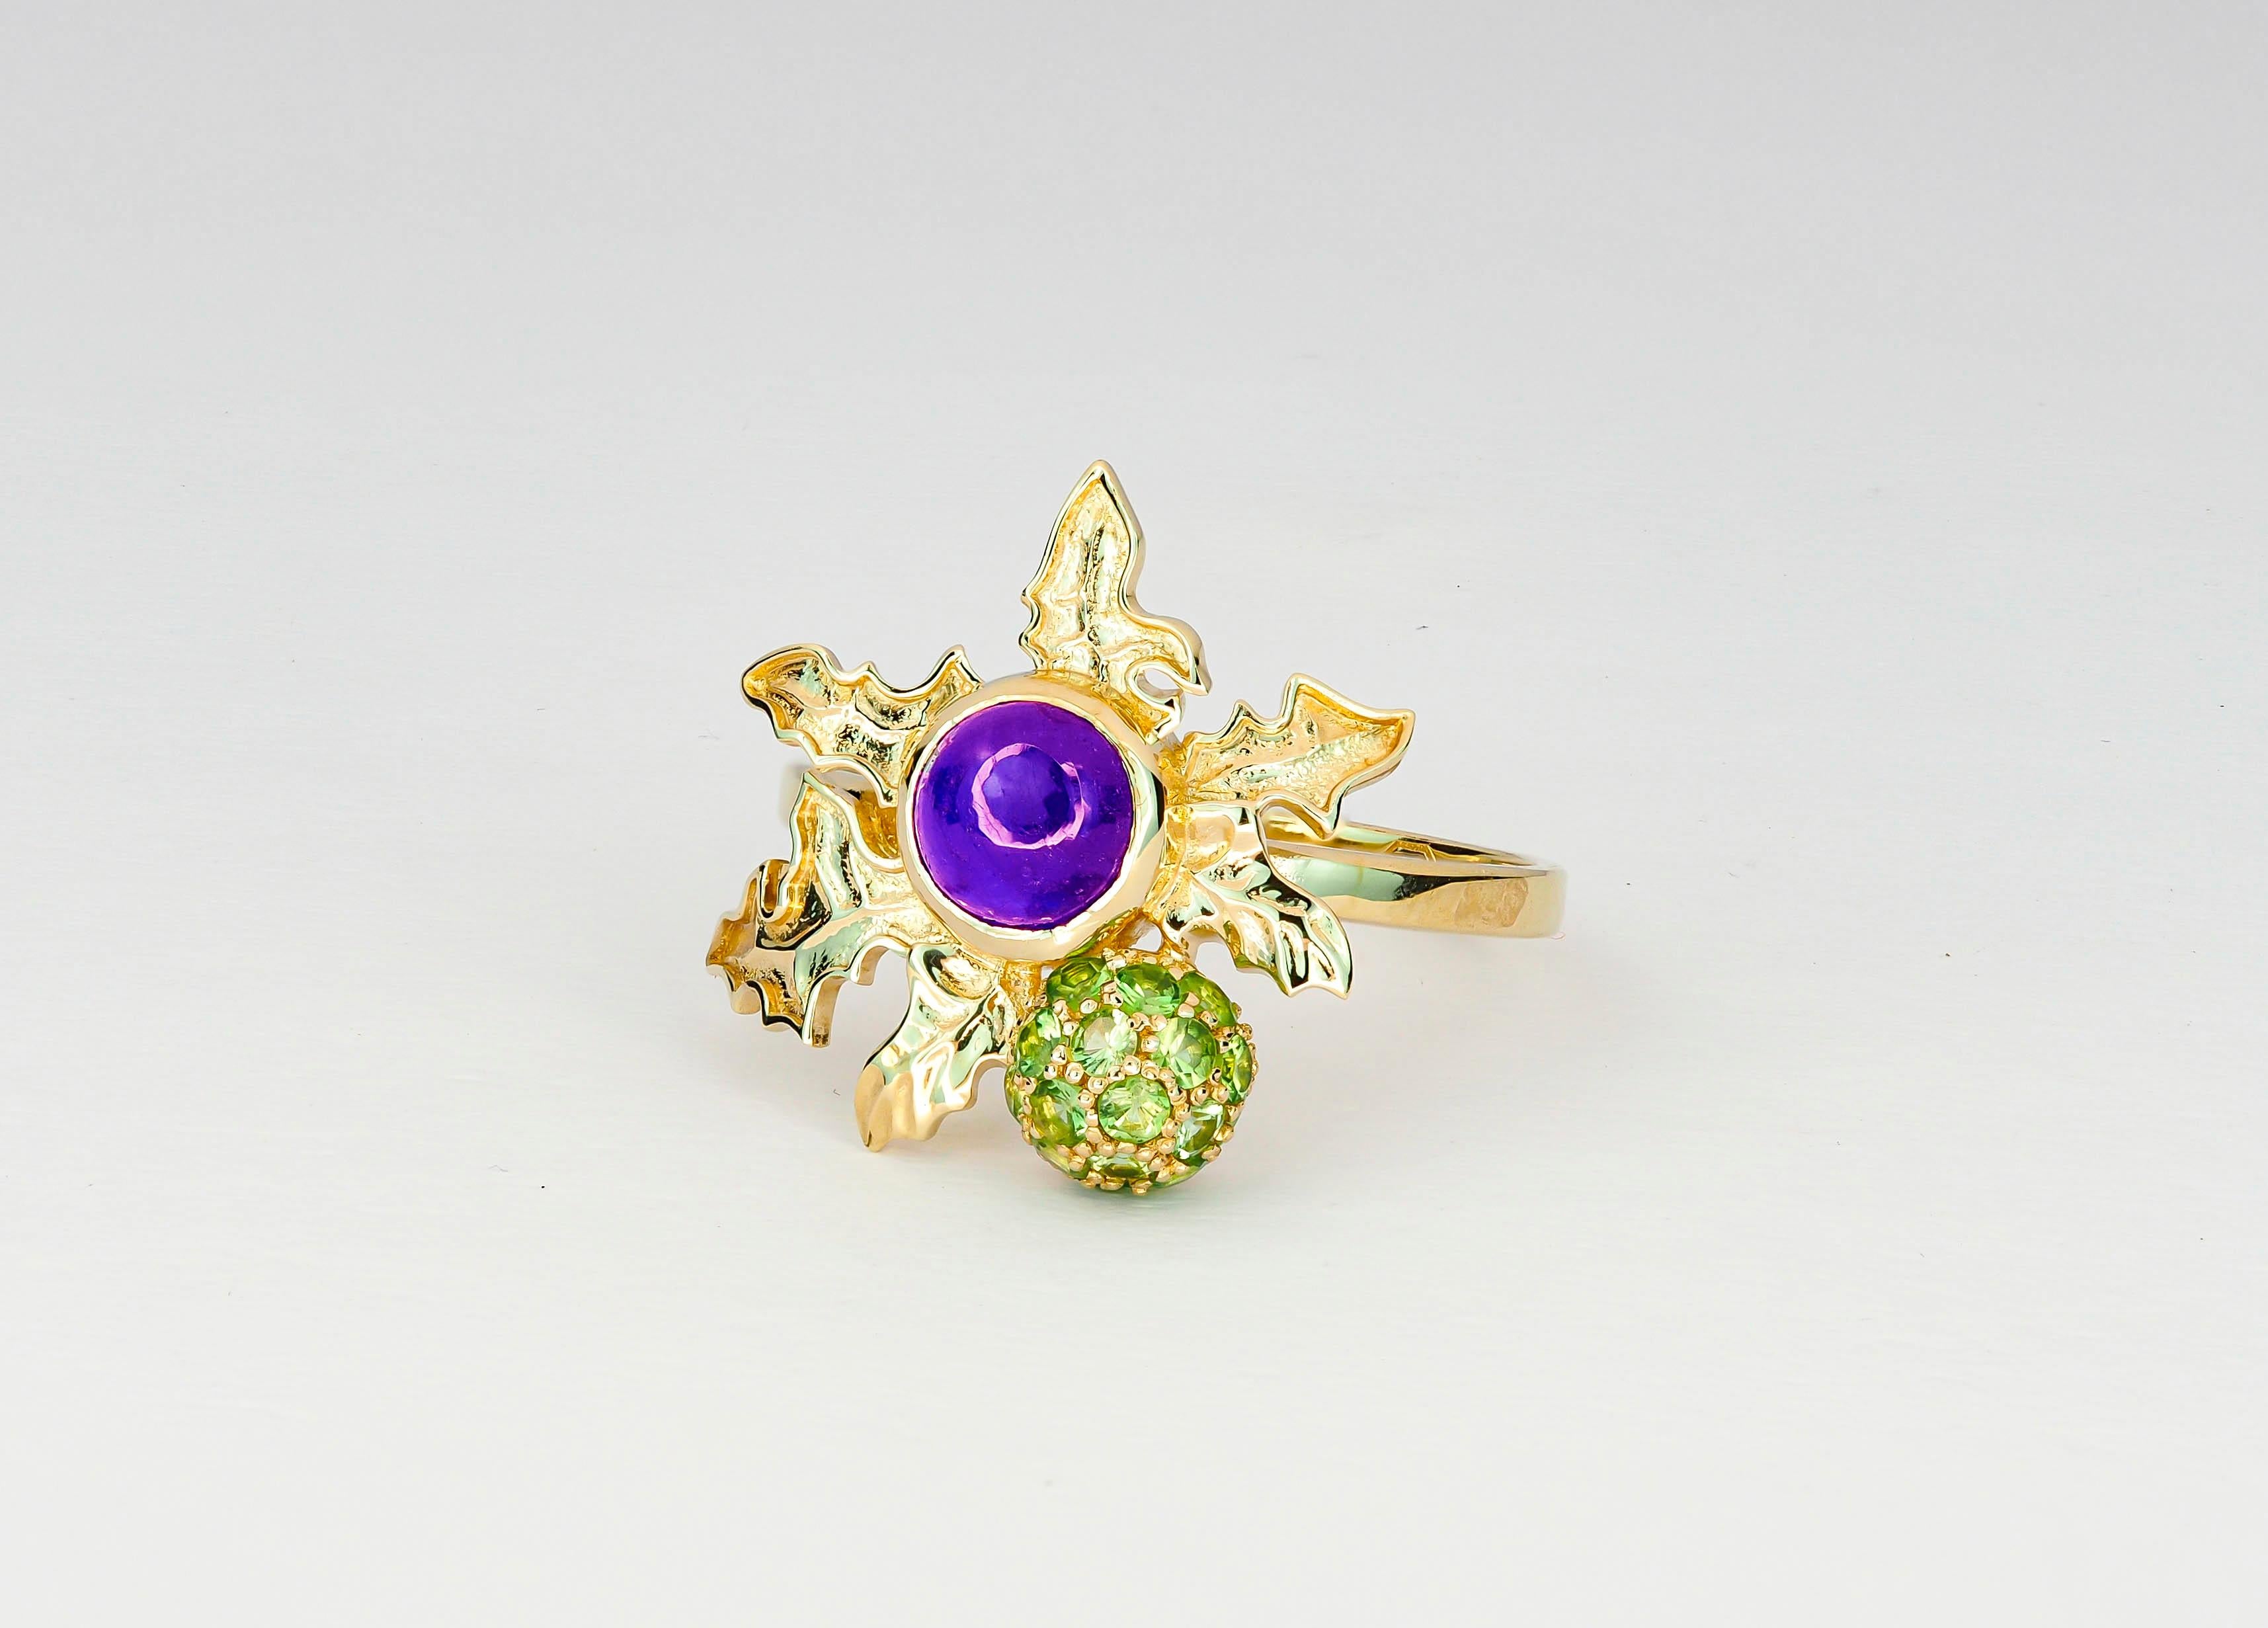 For Sale:  14 K Gold Scottish Thistle Ring with Amethyst and Peridots! 8